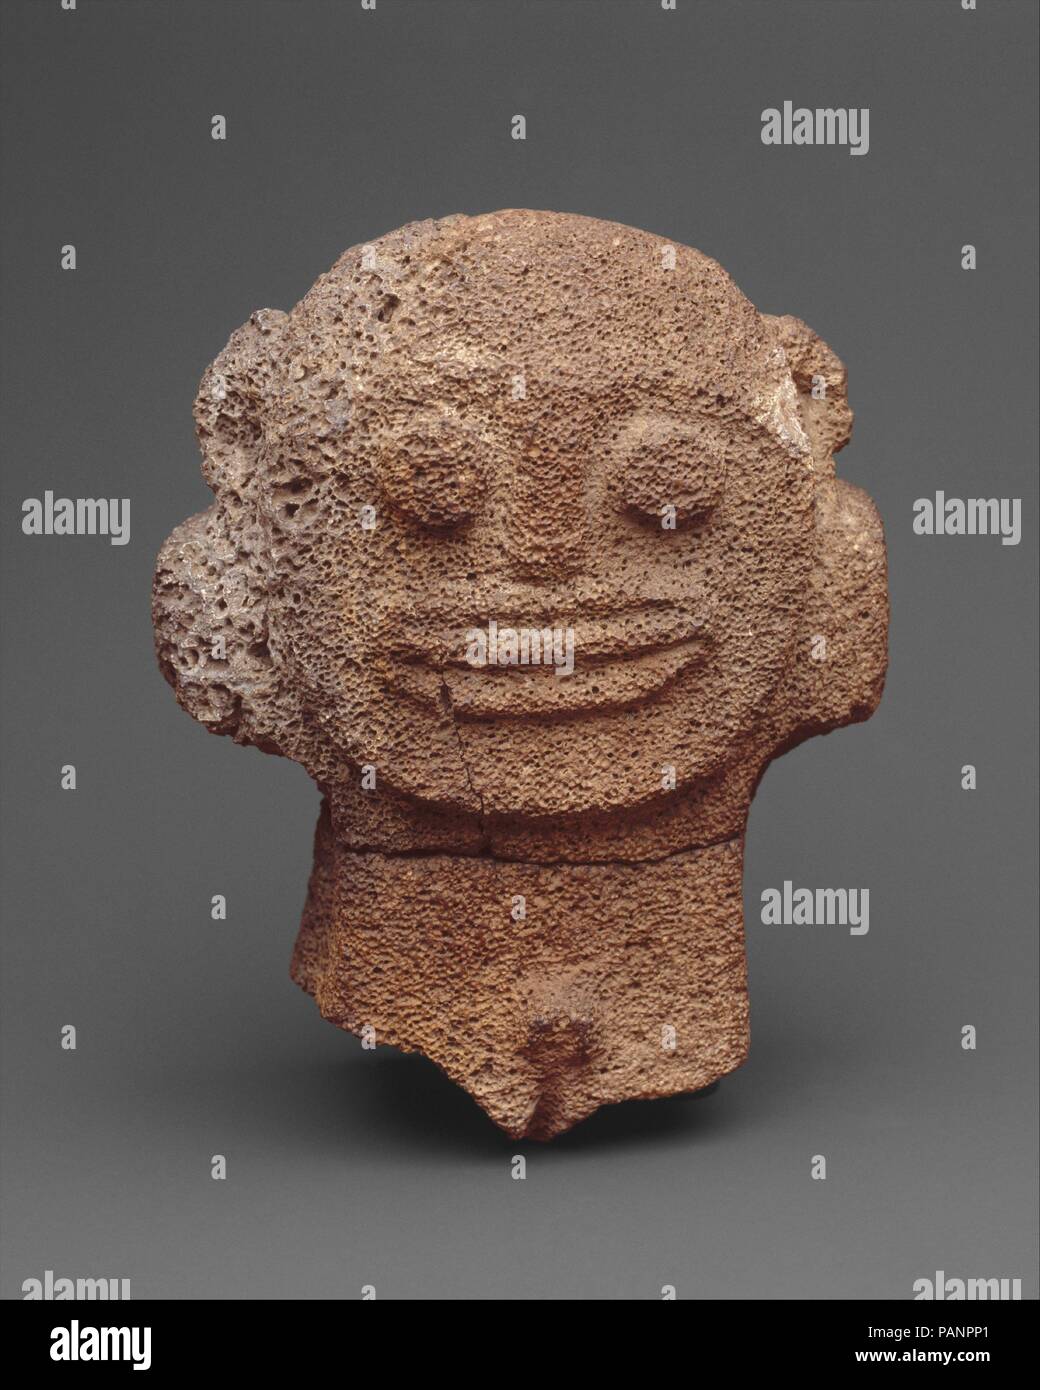 Figure. Culture: Hawai'i. Dimensions: H. 7 3/4 x W. 6 1/8 in. (19.7 x 15.5  cm). Date: 9th-11th century (?). This enigmatic head and torso is one of a  group of eleven